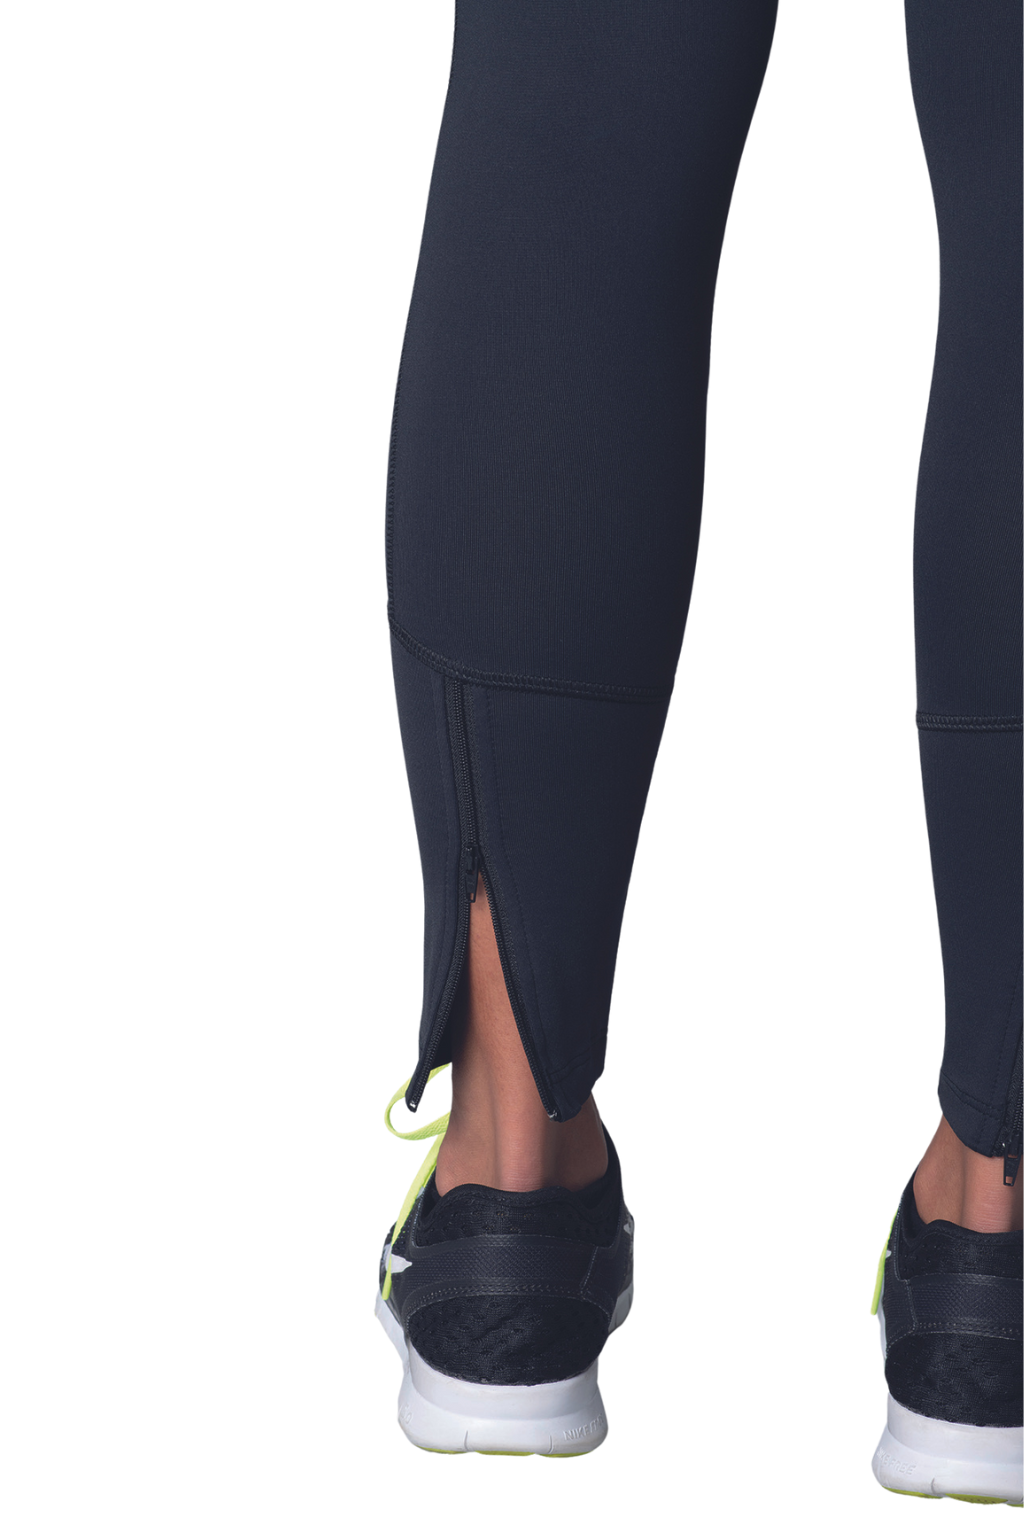 Extremely Comfortable Jogging Pants - METRO BRAZIL